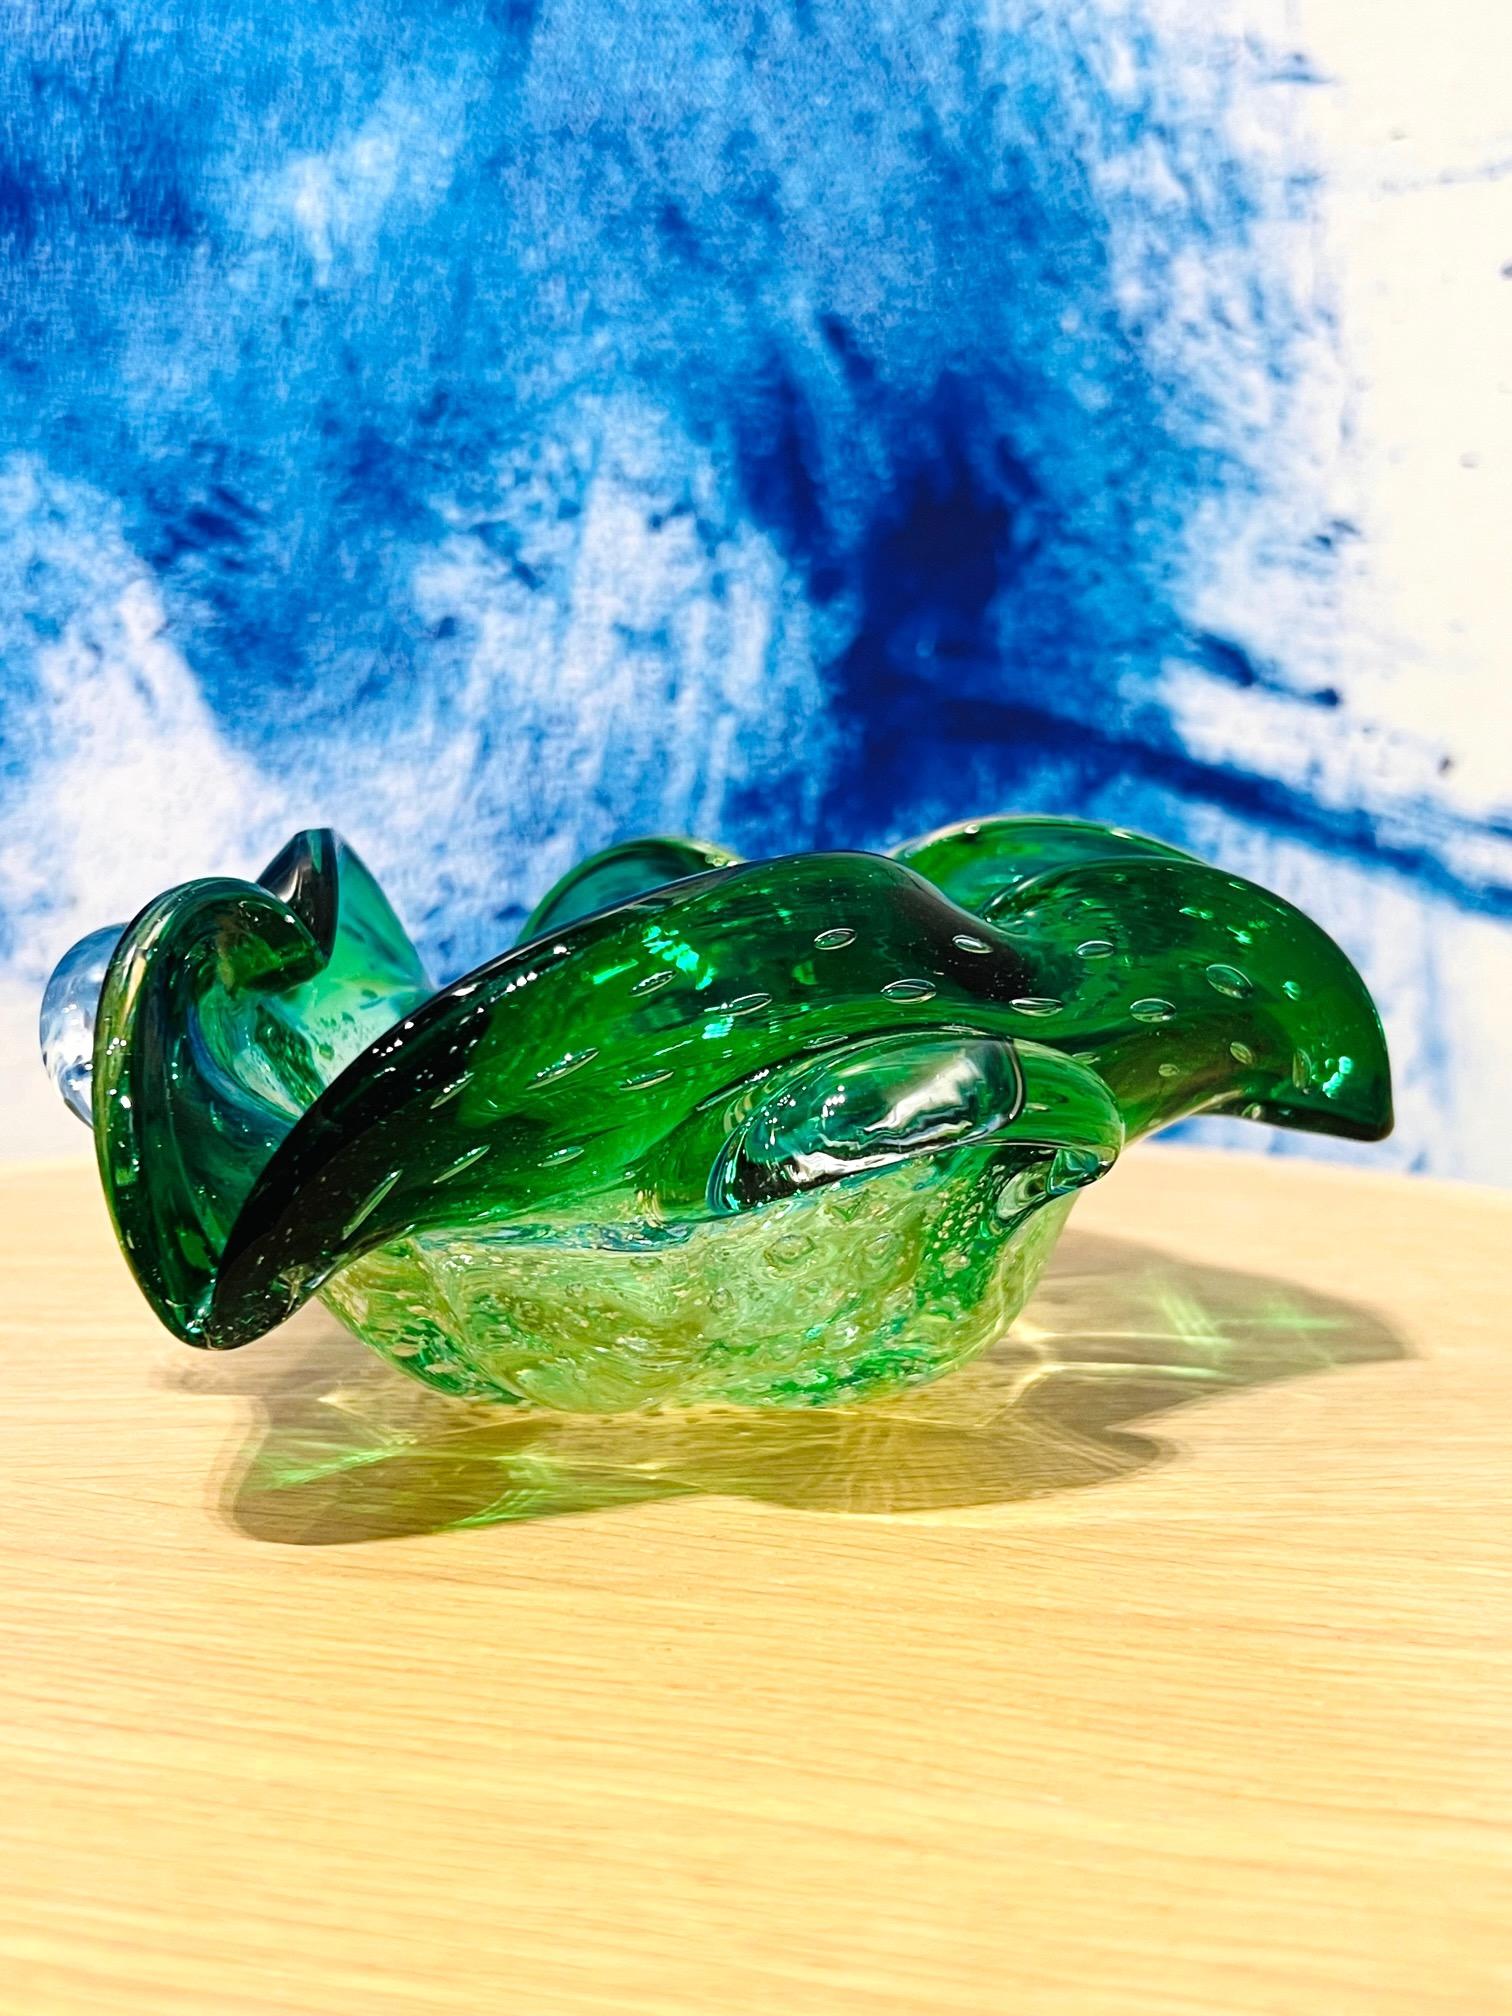 Mid-20th Century Emerald Green Murano Bowl or Ashtray with Gold Leaf Accents, Italy c. 1950s